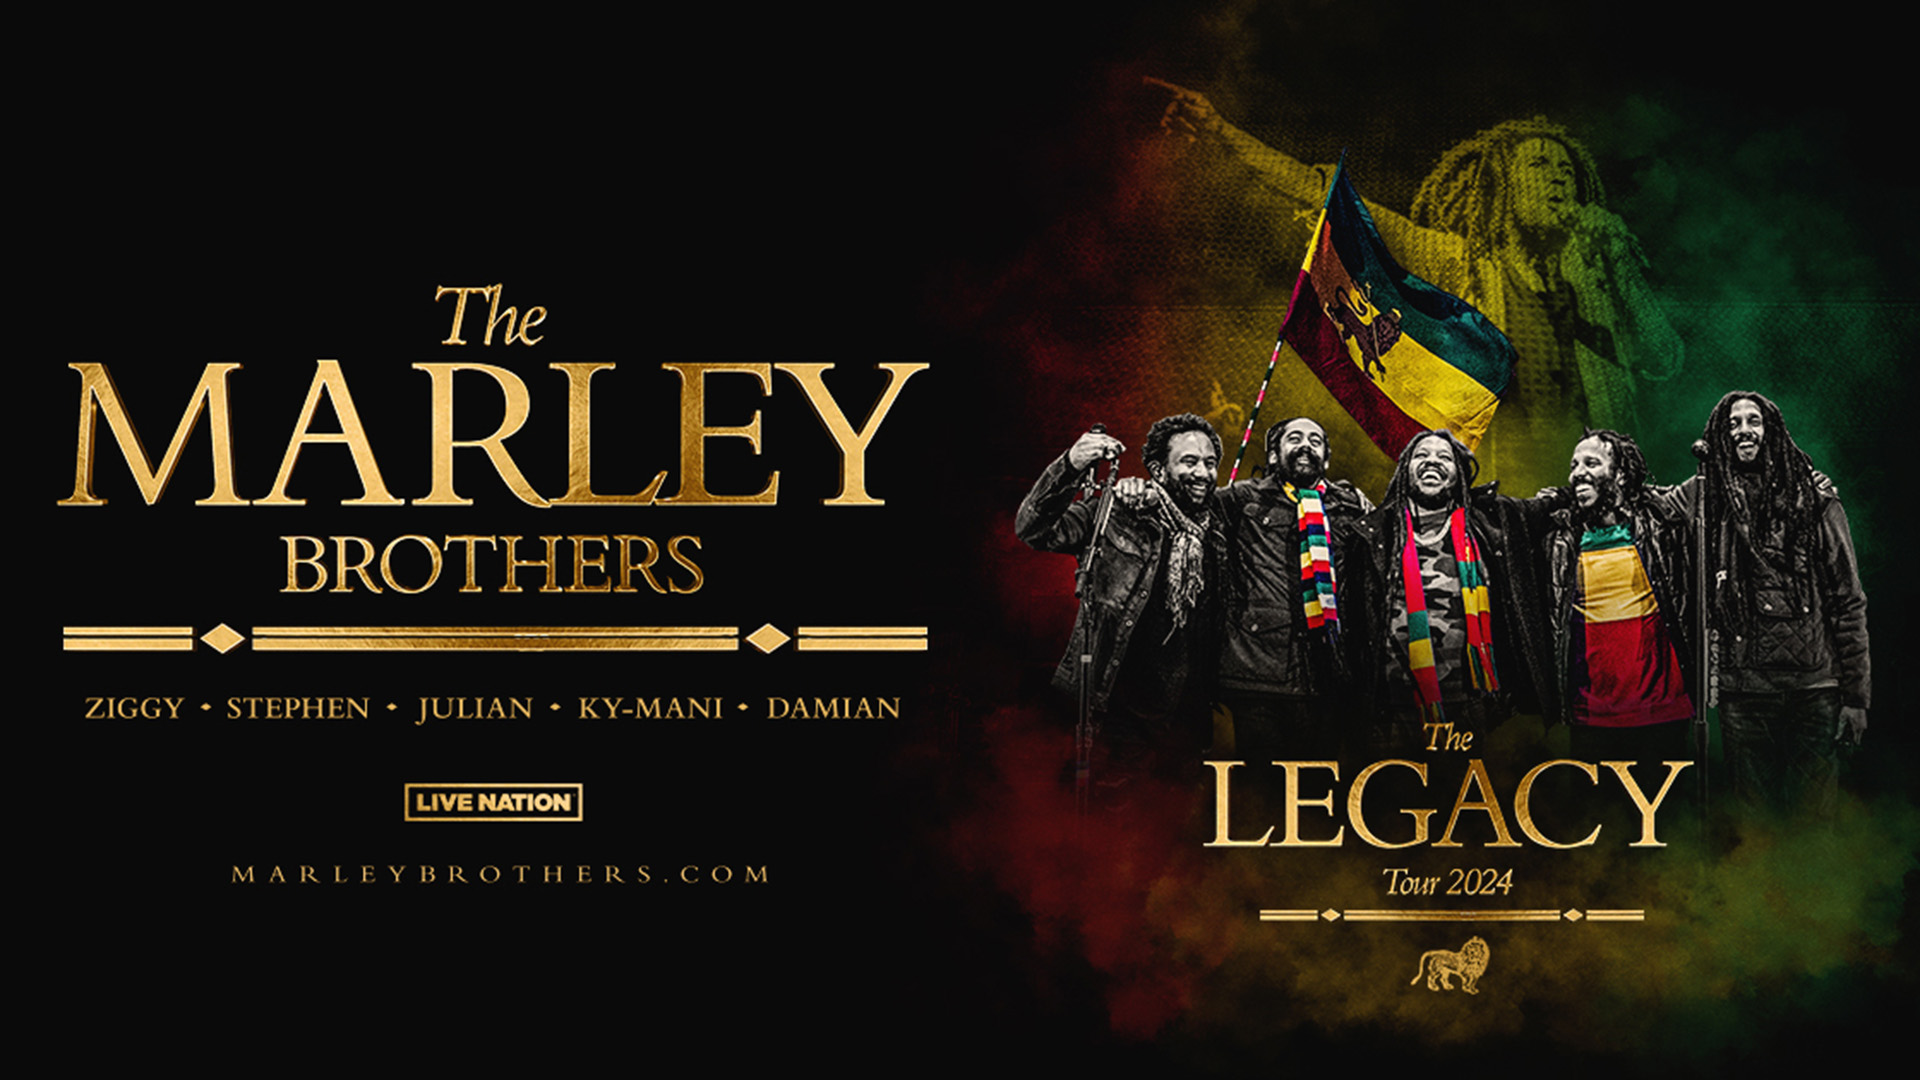 Get Presale Tickets to The Marley Brothers: The Legacy Tour